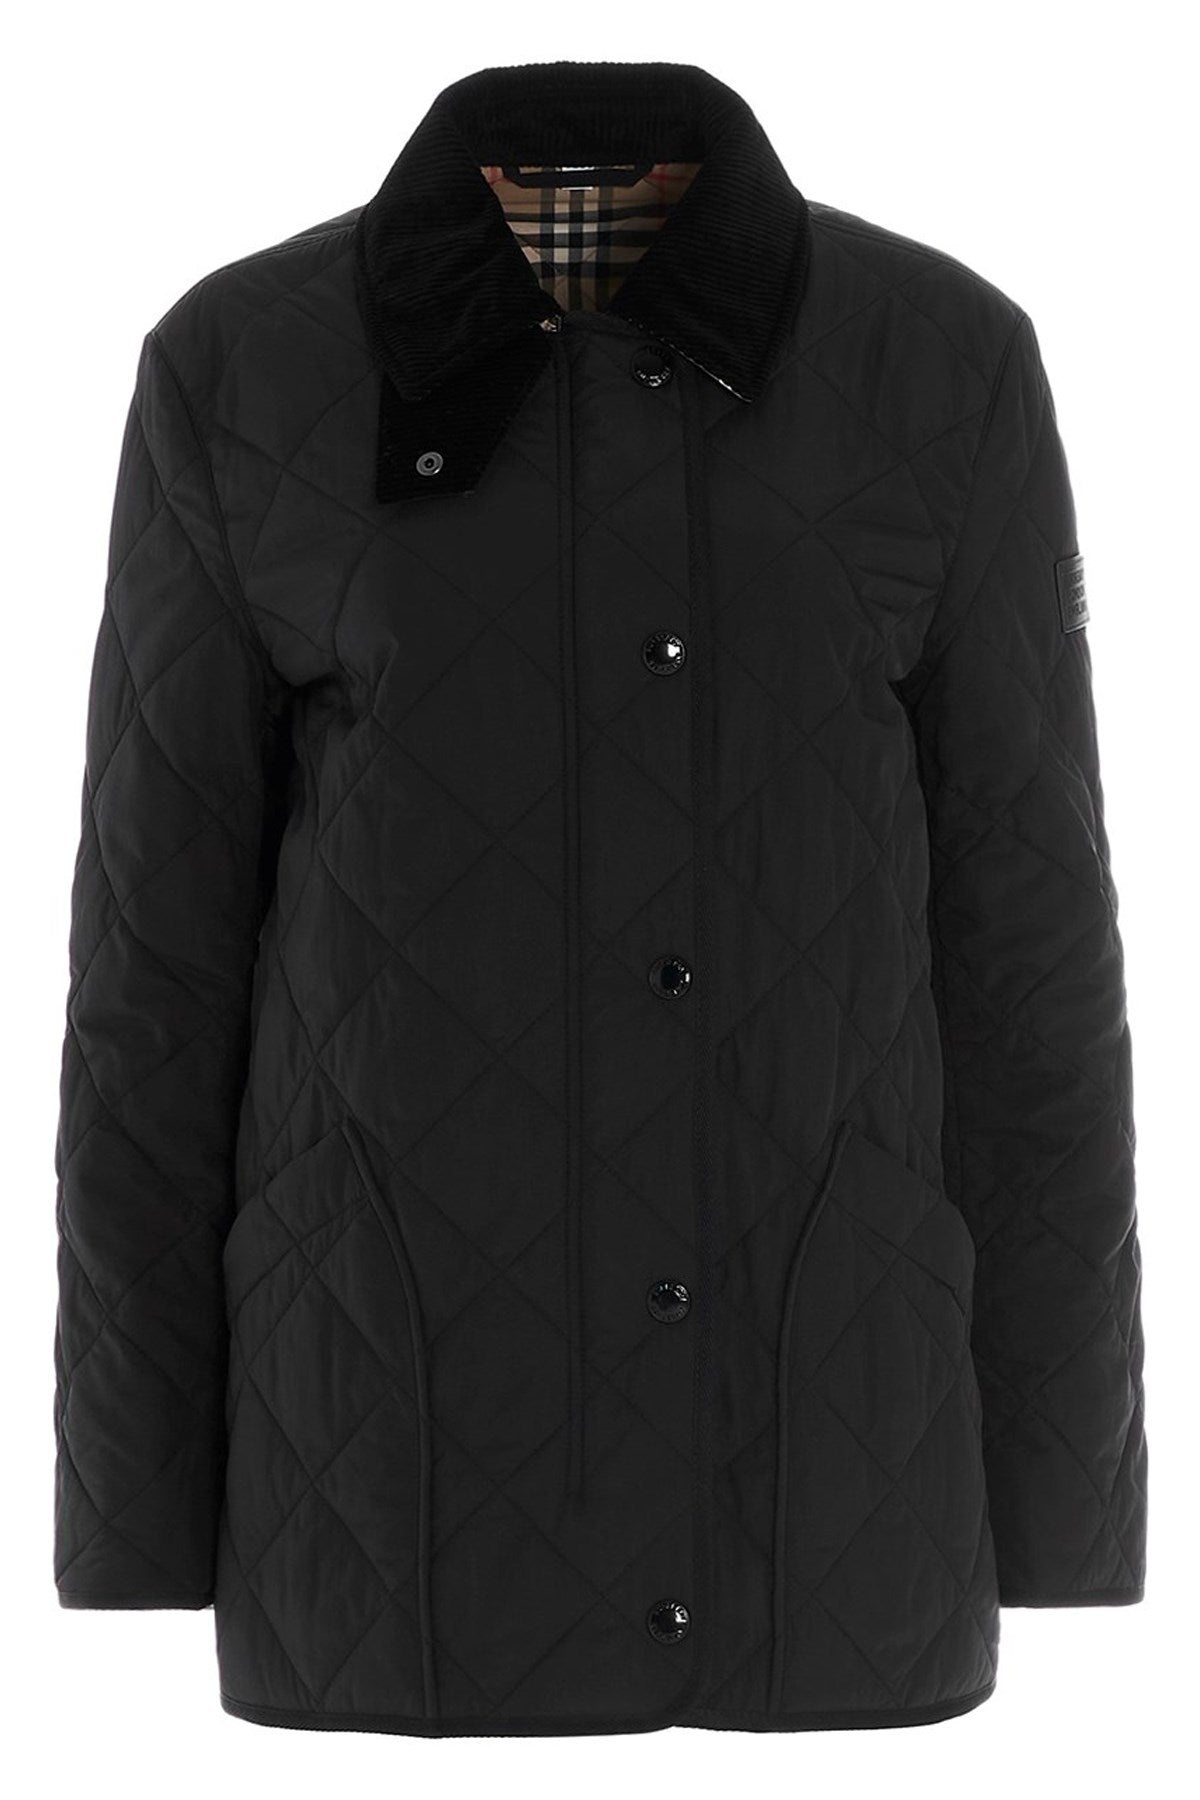 Burberry Women Quilted Jacket 'Cotswold' - 1